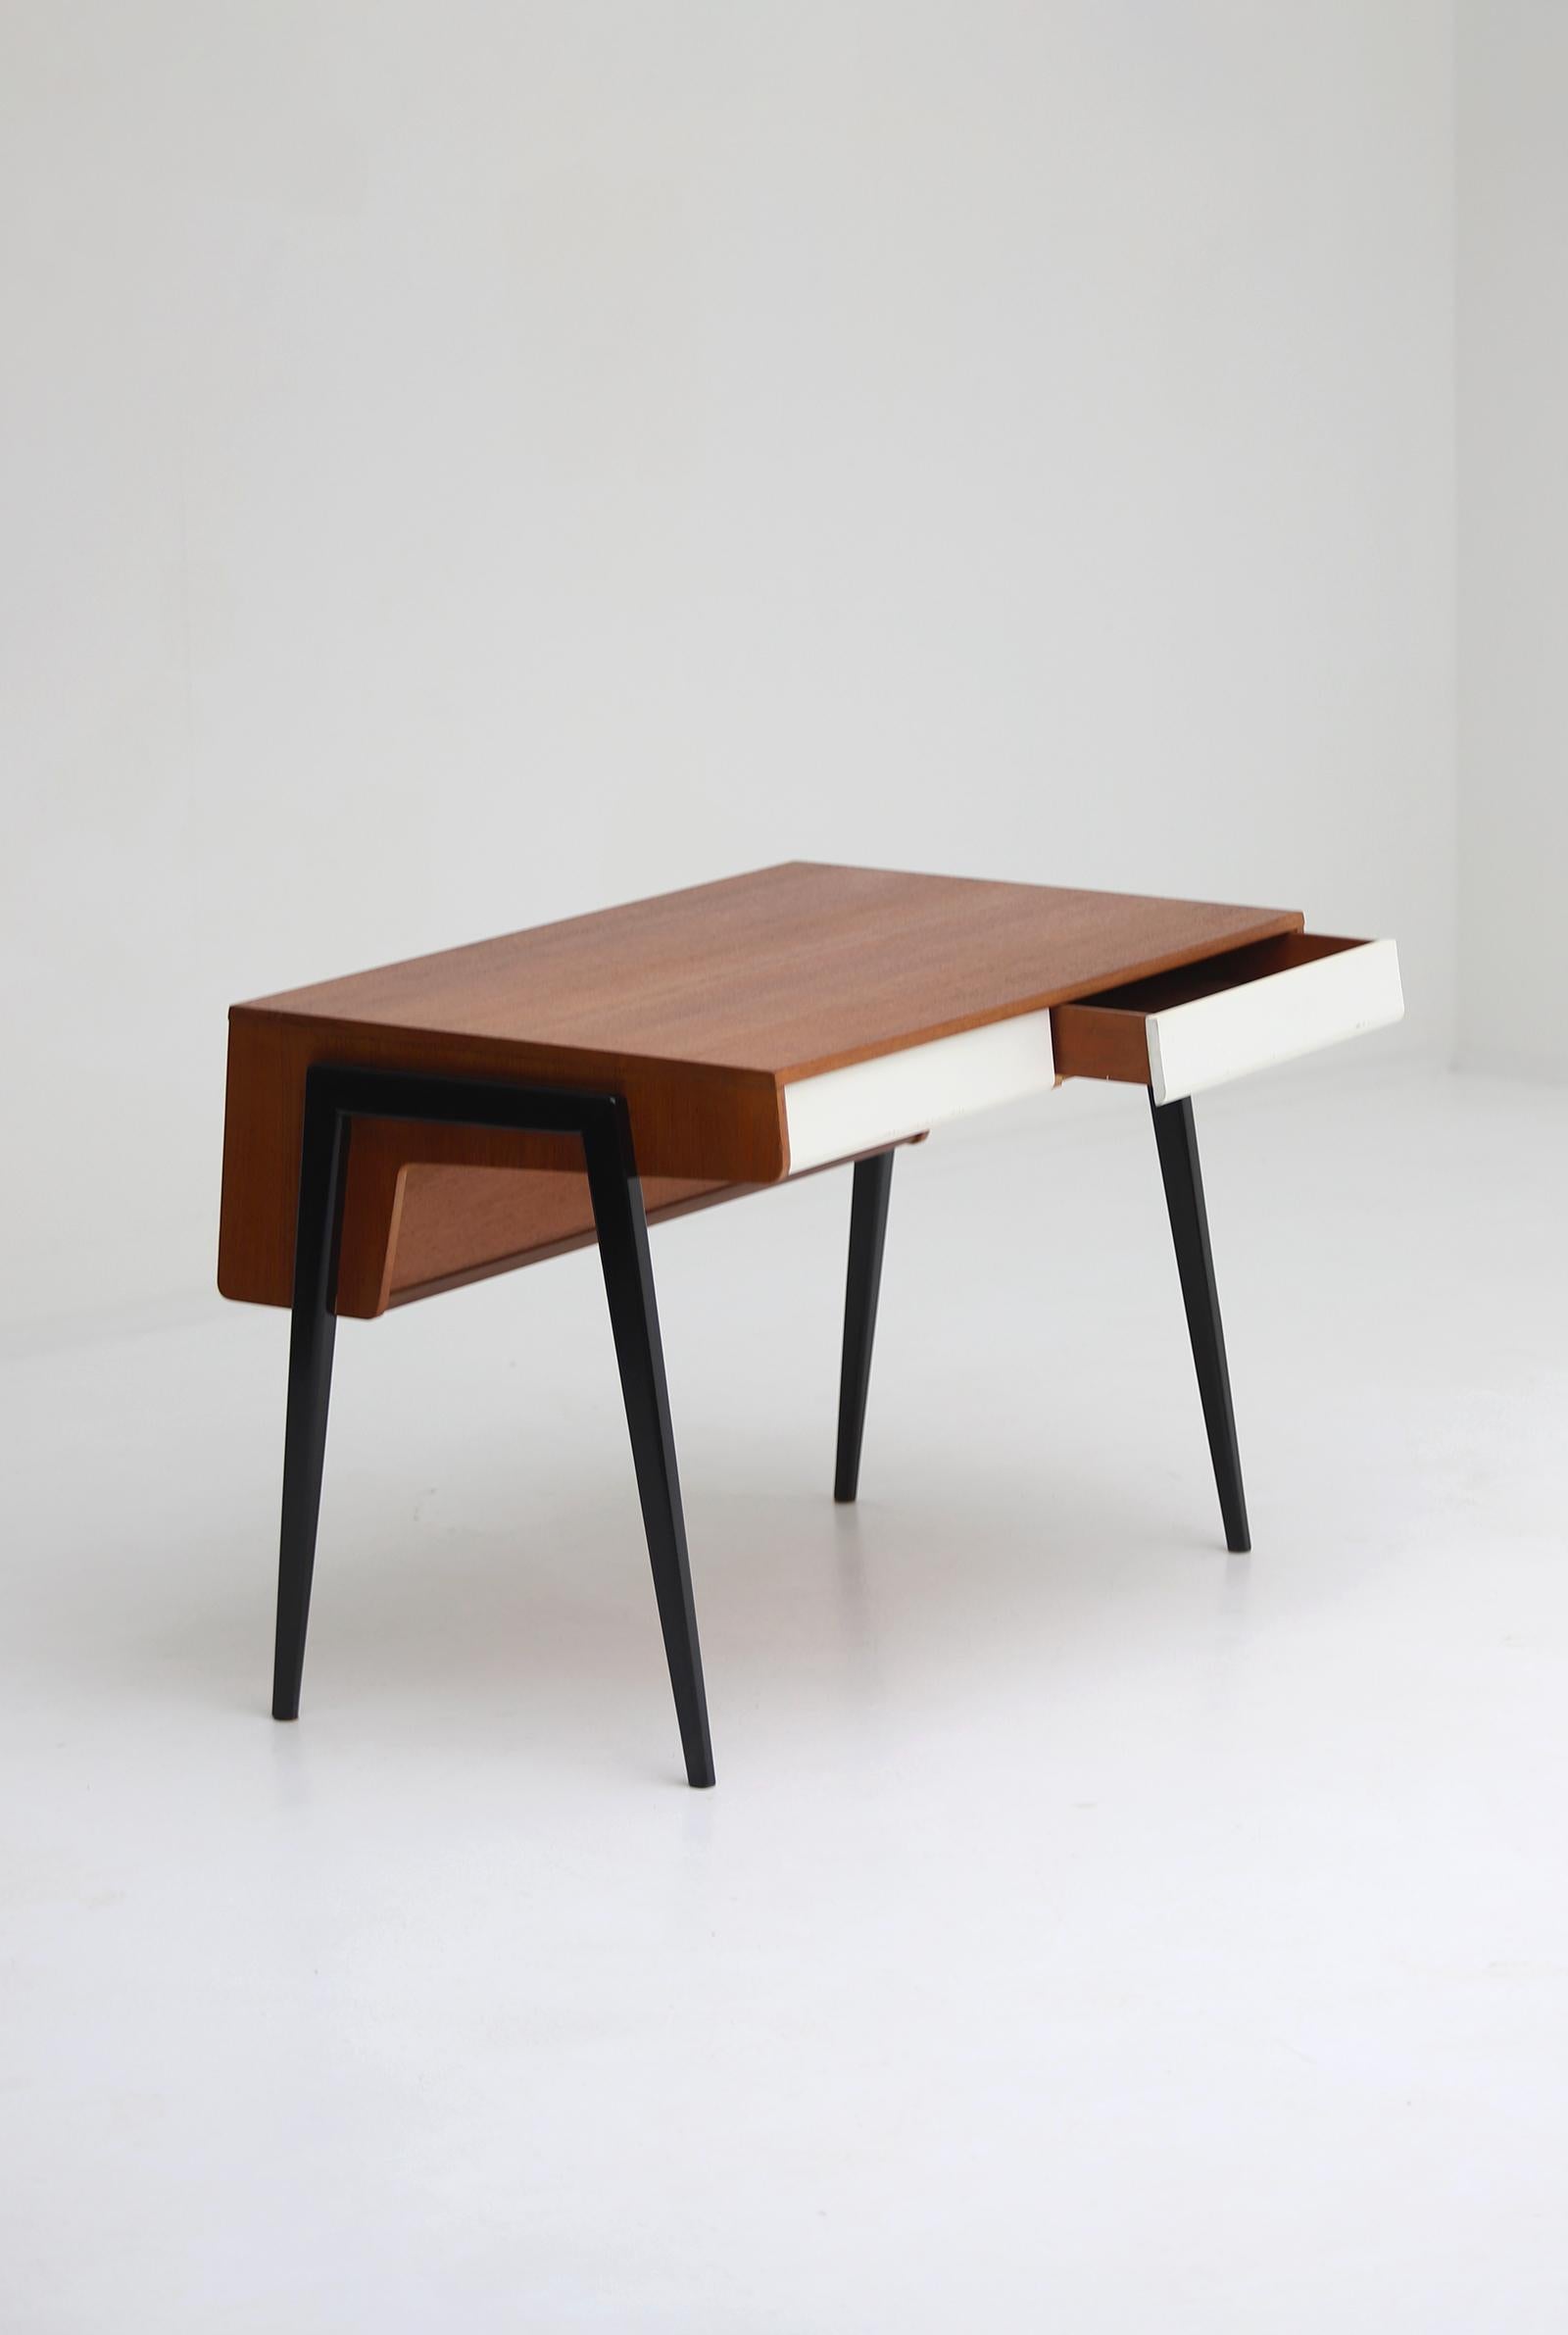 Mid-20th Century Mid-Century Modern Writing Desk Manufactured by Everest in the 1950s